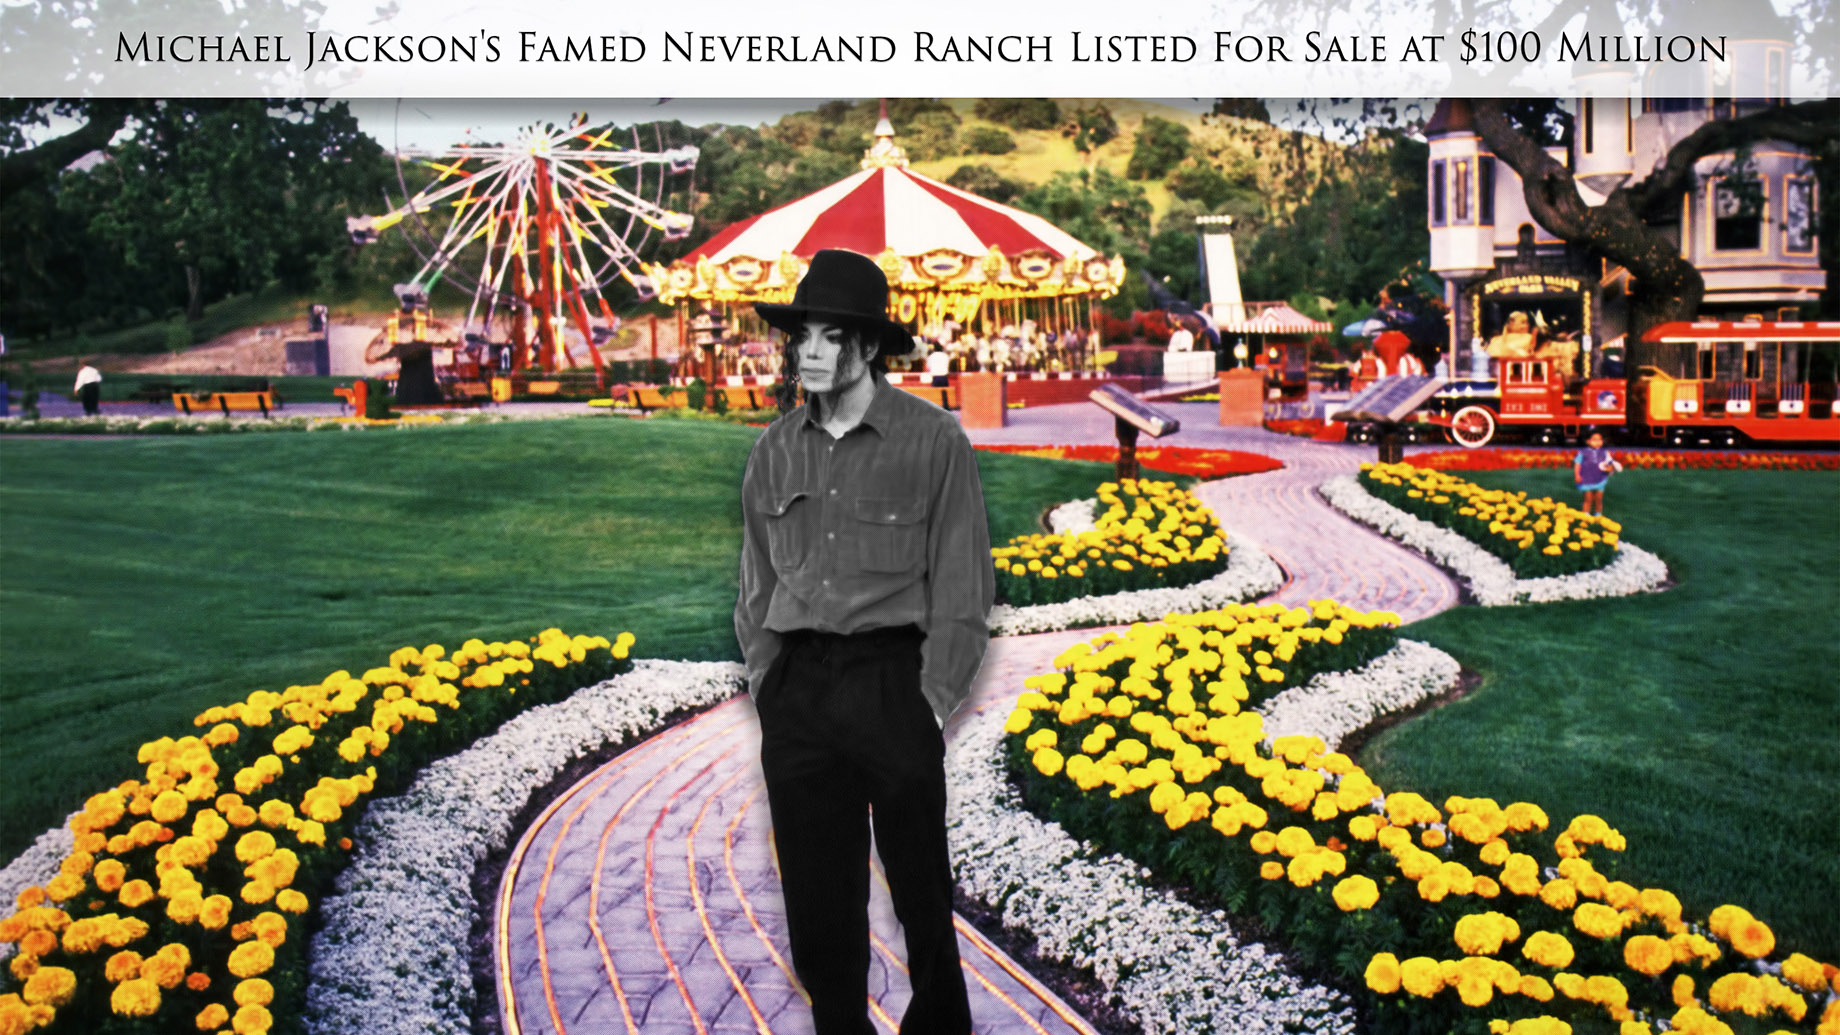 Michael Jackson's Famed Neverland Valley Ranch Listed For Sale at $100 Million